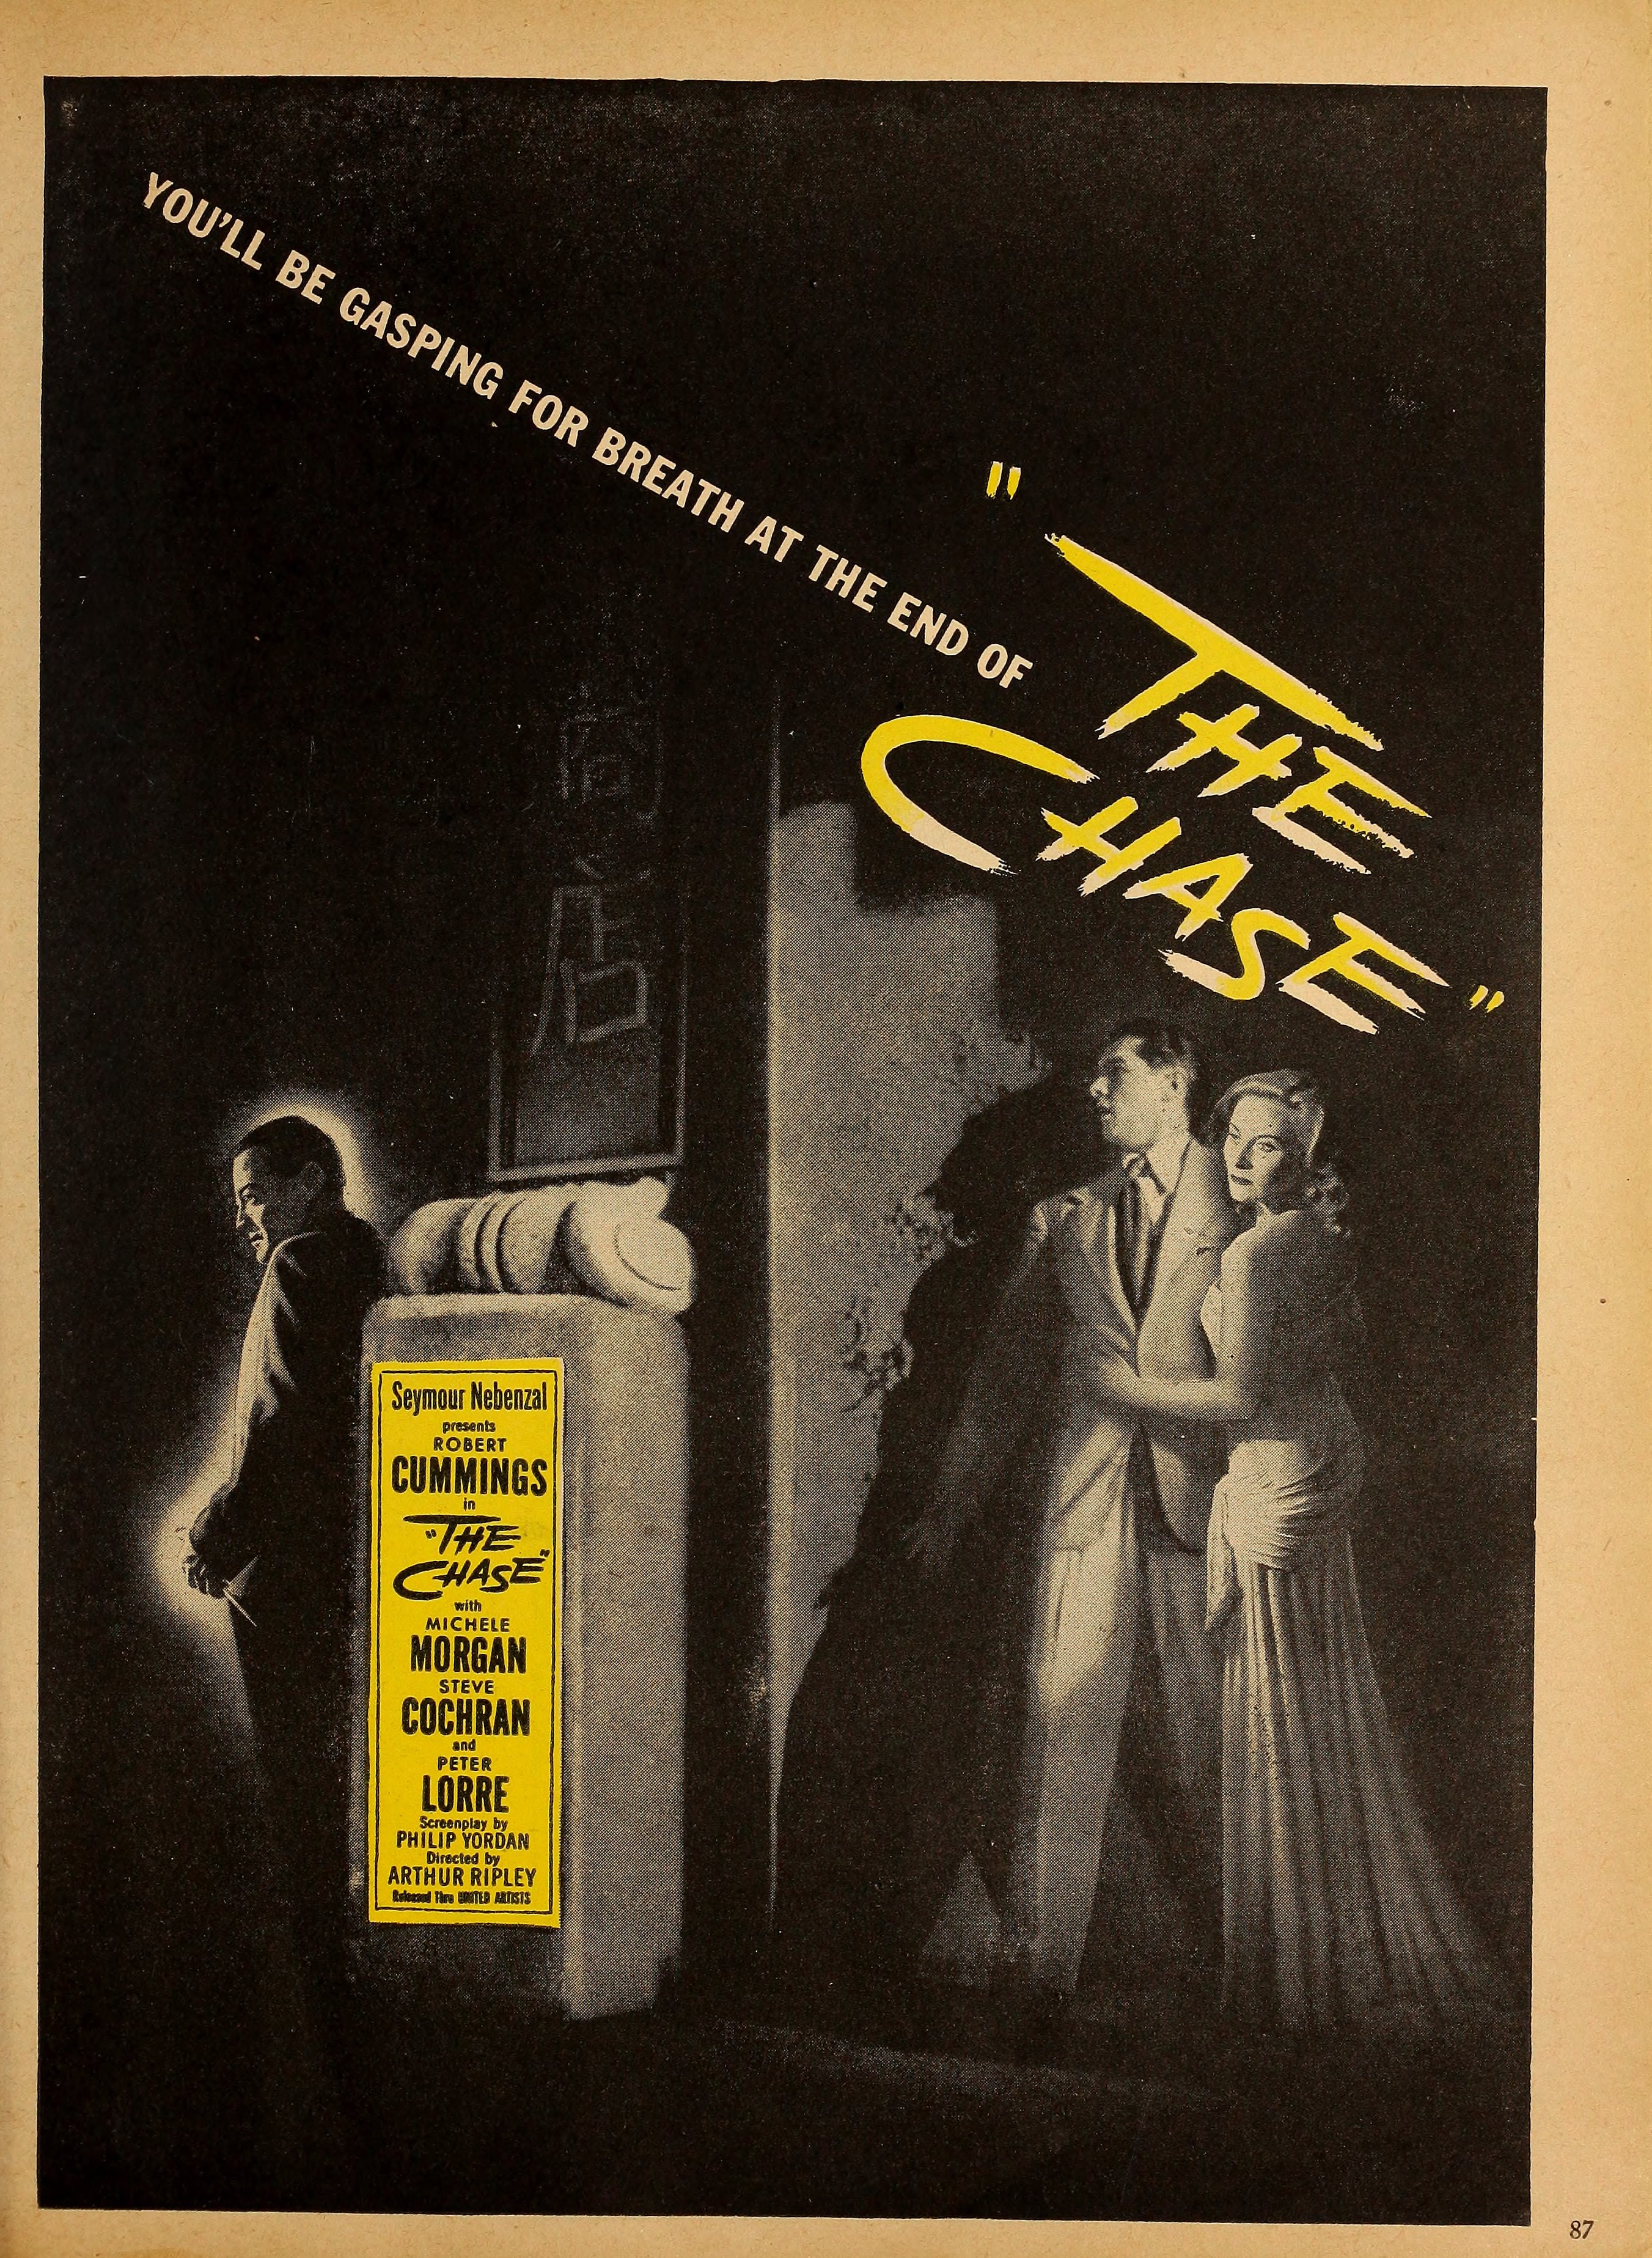 The Chase (1946) | www.vintoz.com